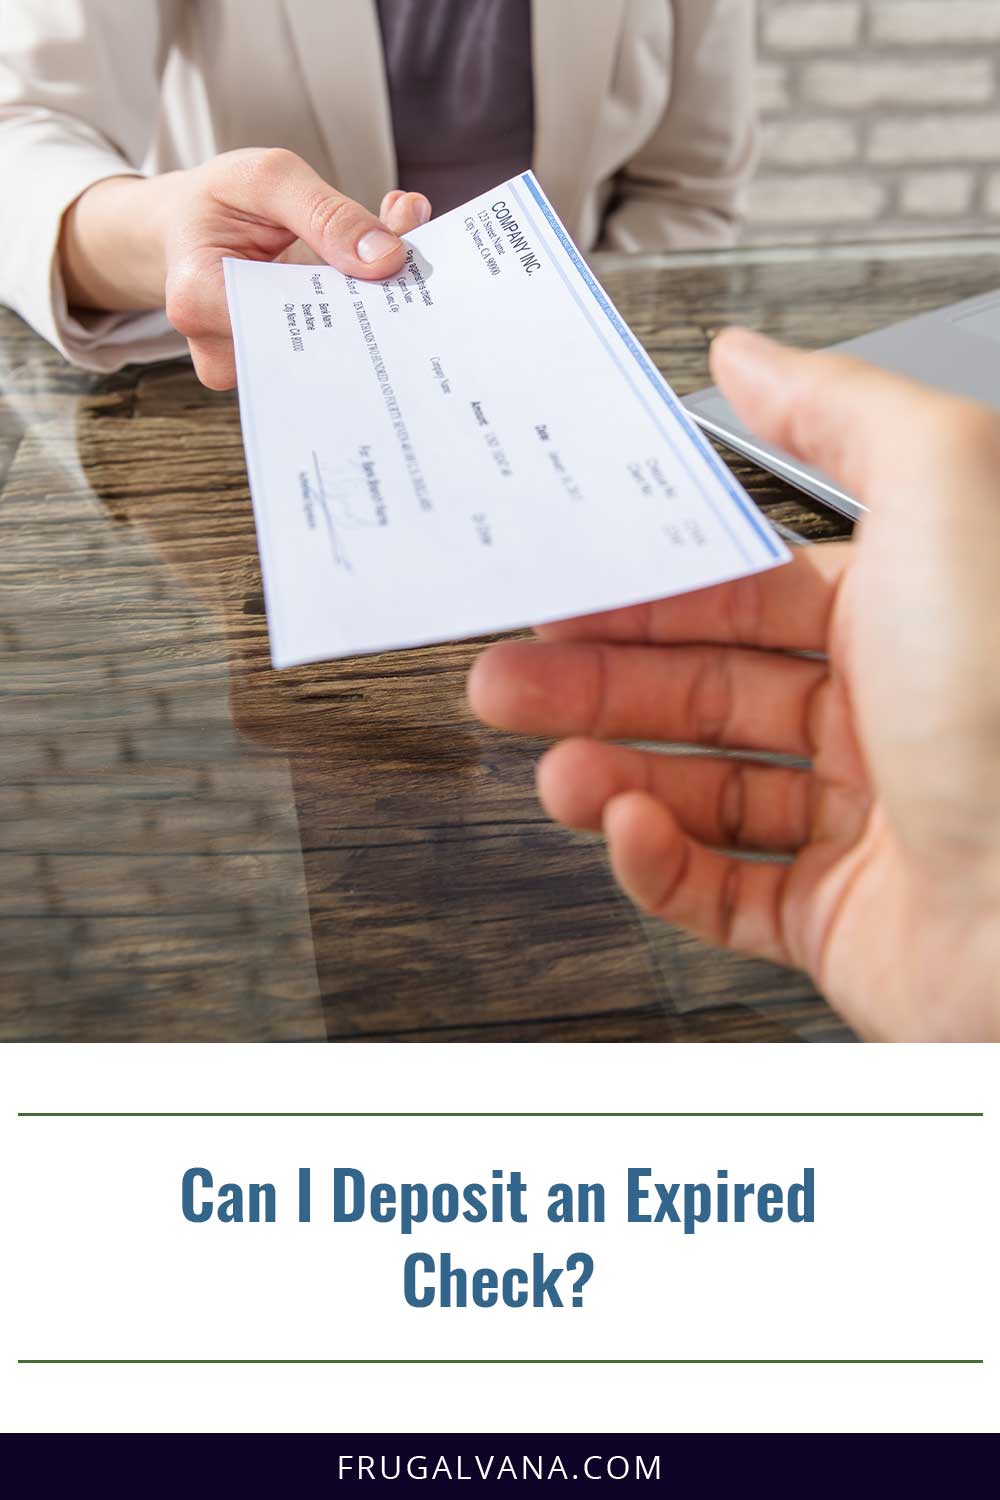 Can I Deposit an Expired Check?